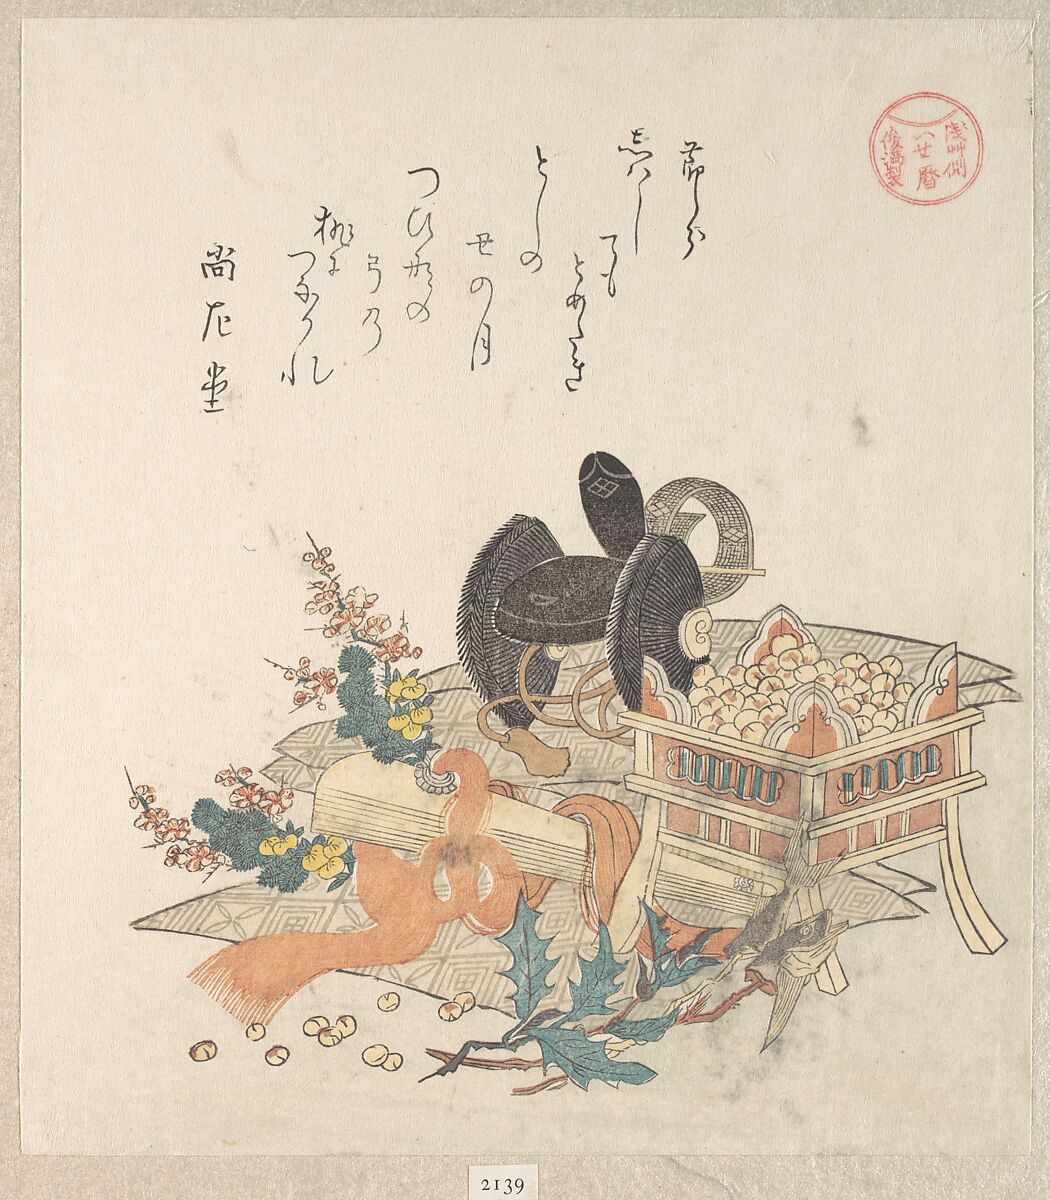 “Beans for Tossing During Setsubun Exorcism Ceremony,” from the series Ise Calendars for the Asakusa Group (Asakusa-gawa Ise goyomi)
From the Spring Rain Collection (Harusame shū), vol. 2, Kubo Shunman (Japanese, 1757–1820) (?), Woodblock print (surimono); ink and color on paper, Japan 